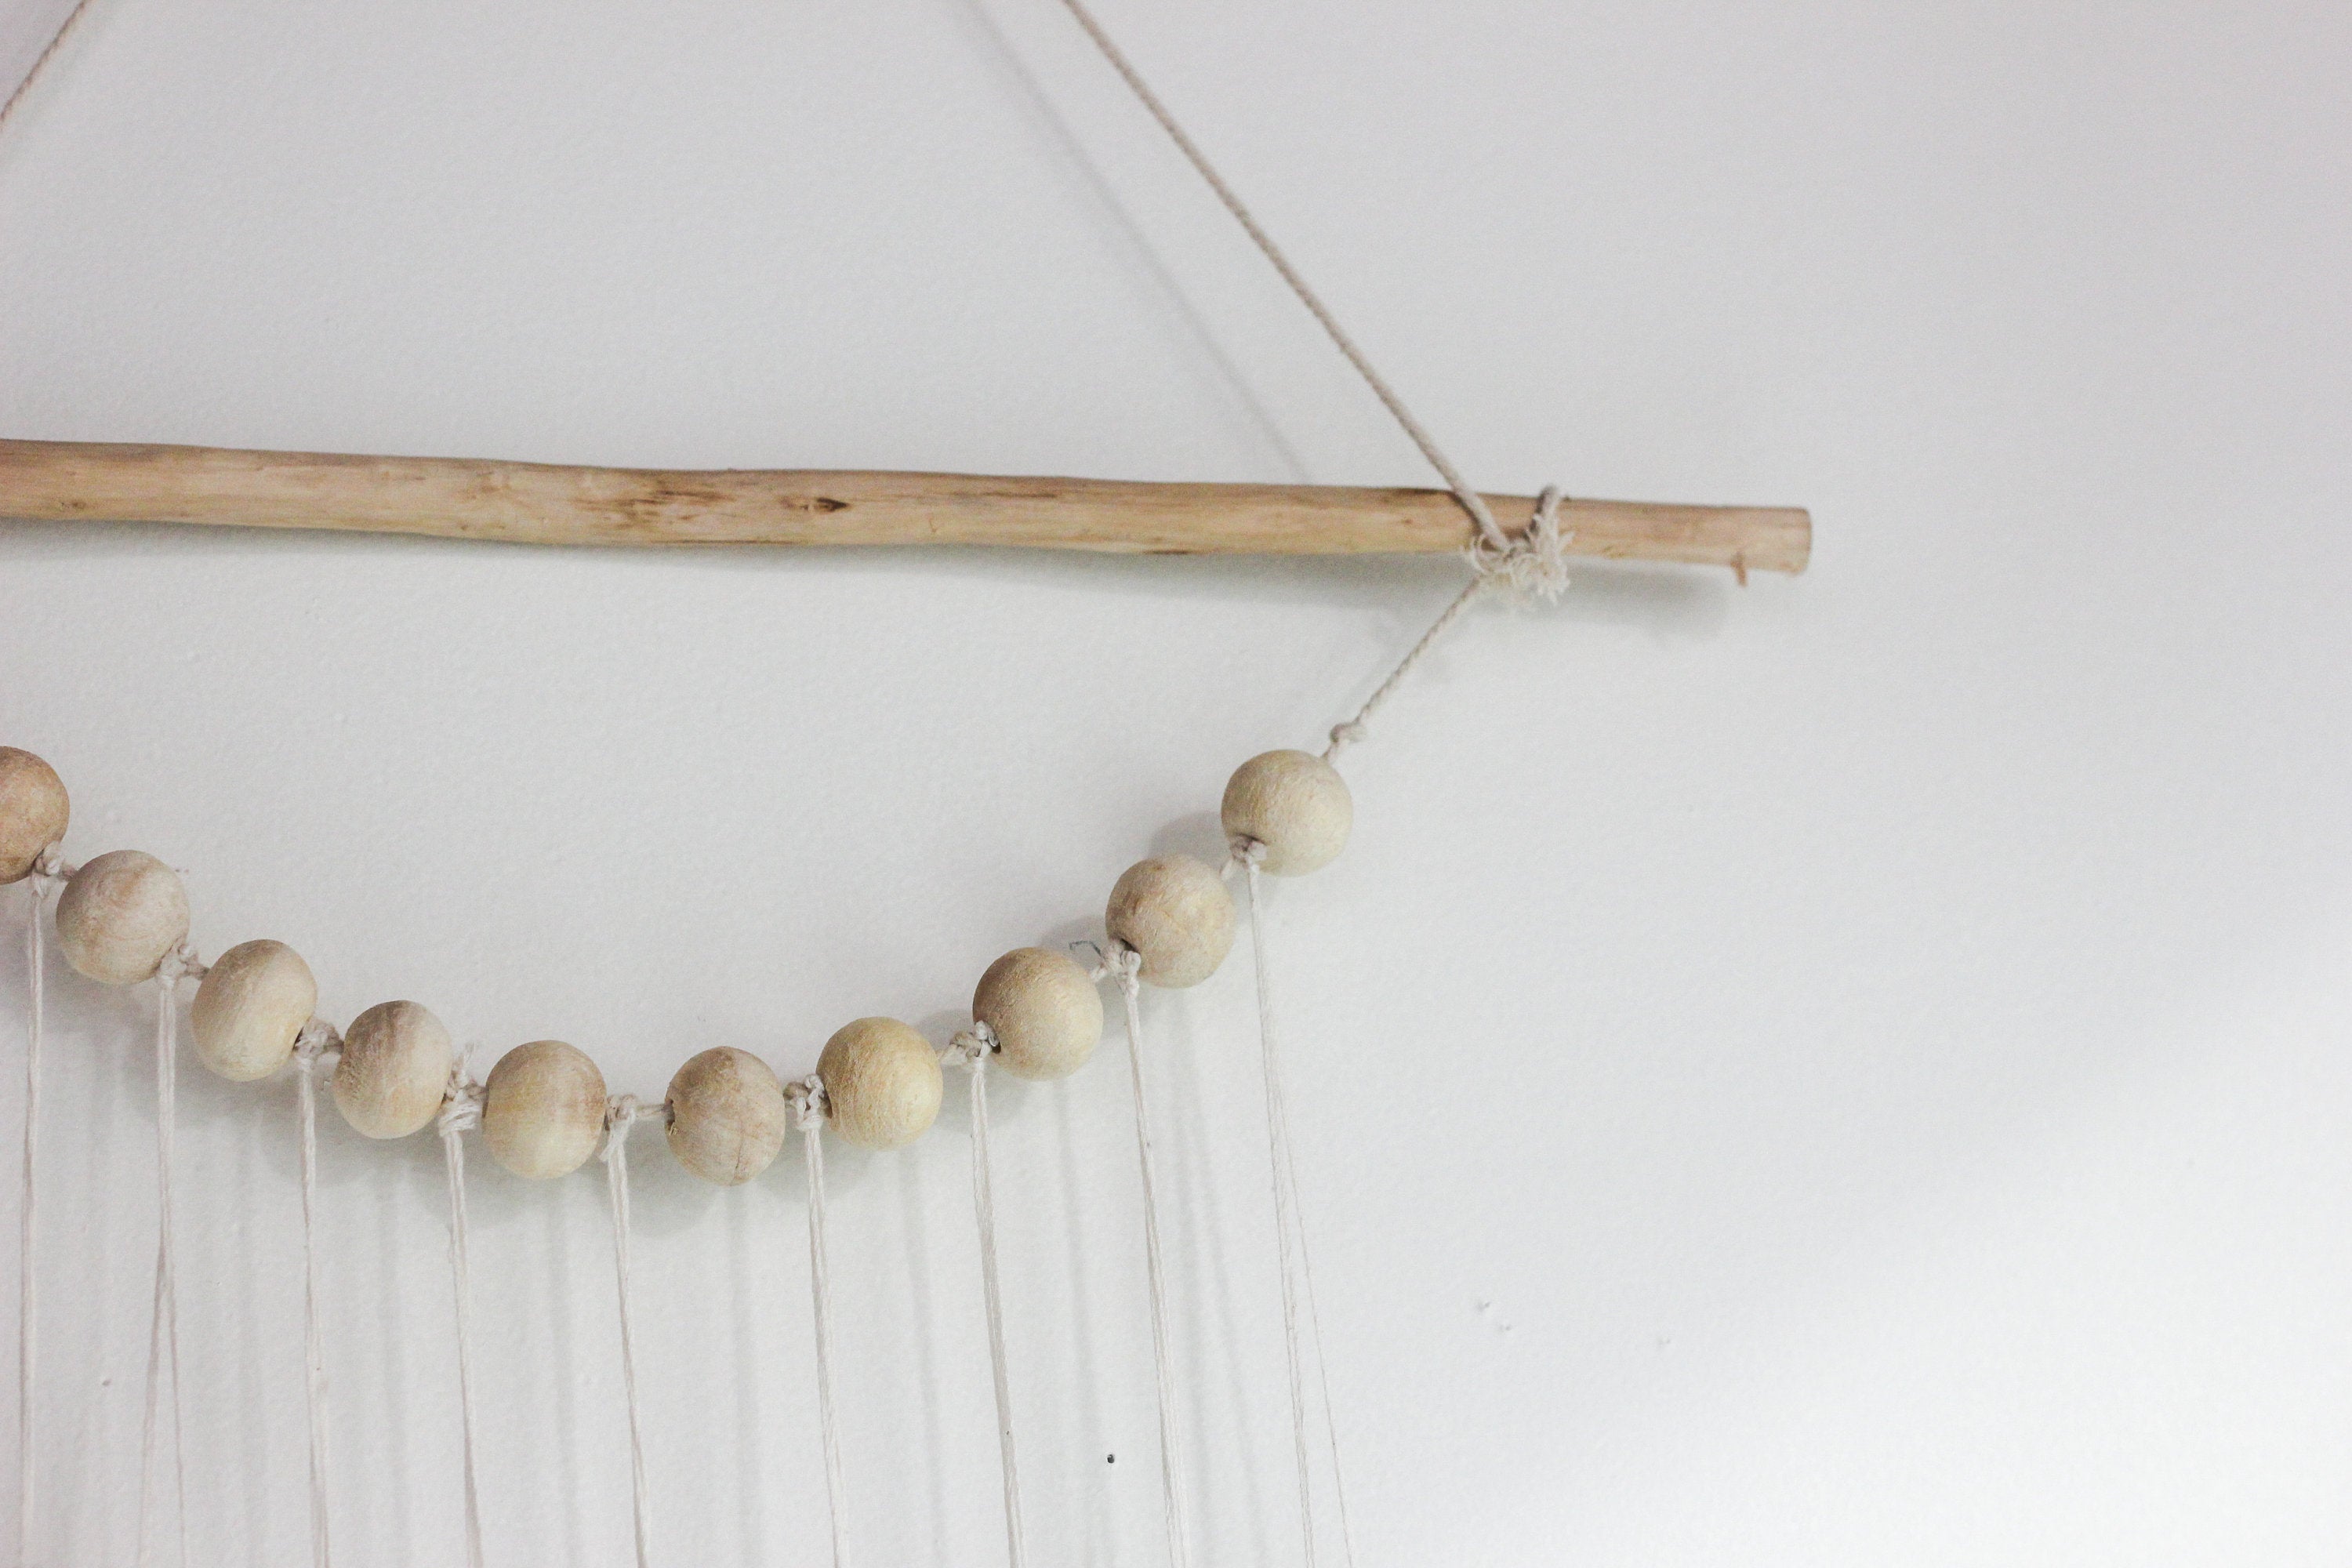 Boho Taupe Ombre Tassel Wood Wall Hanging